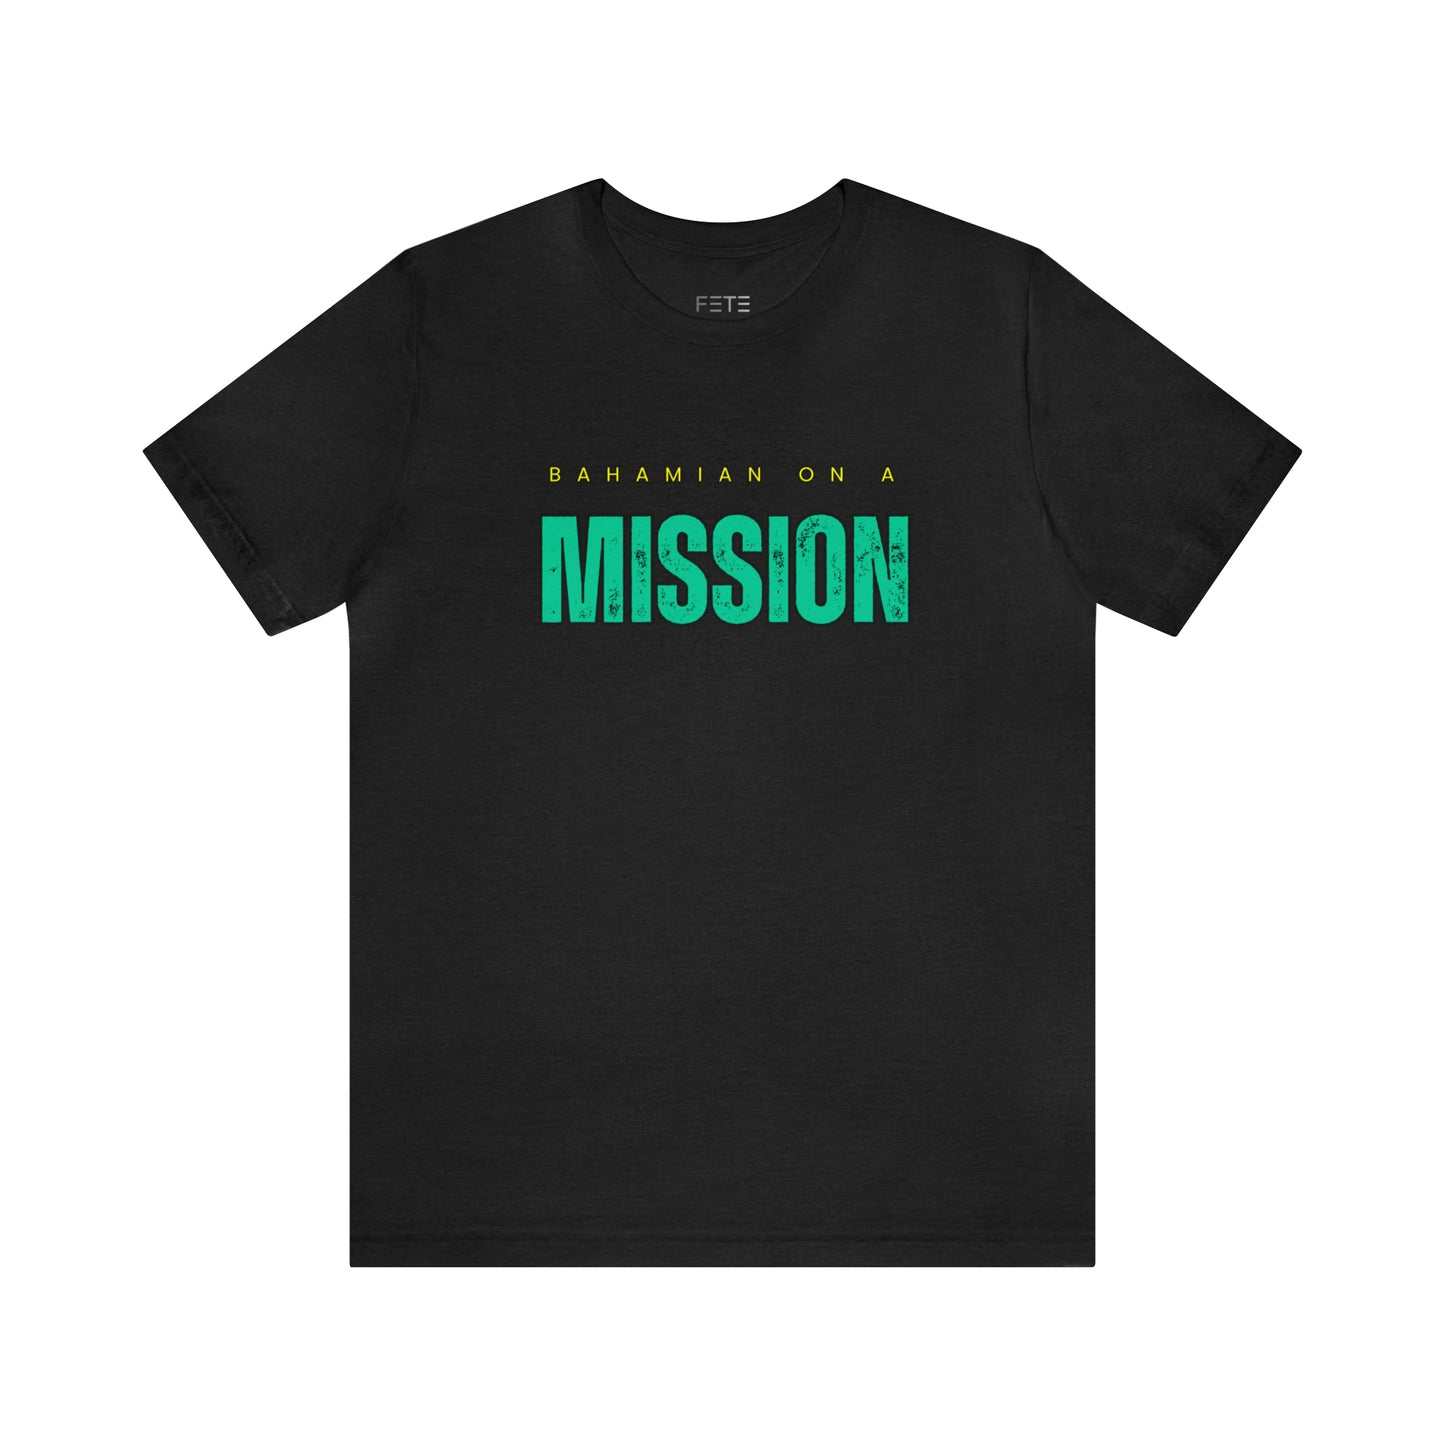 Bahamian on a Mission SS Tee